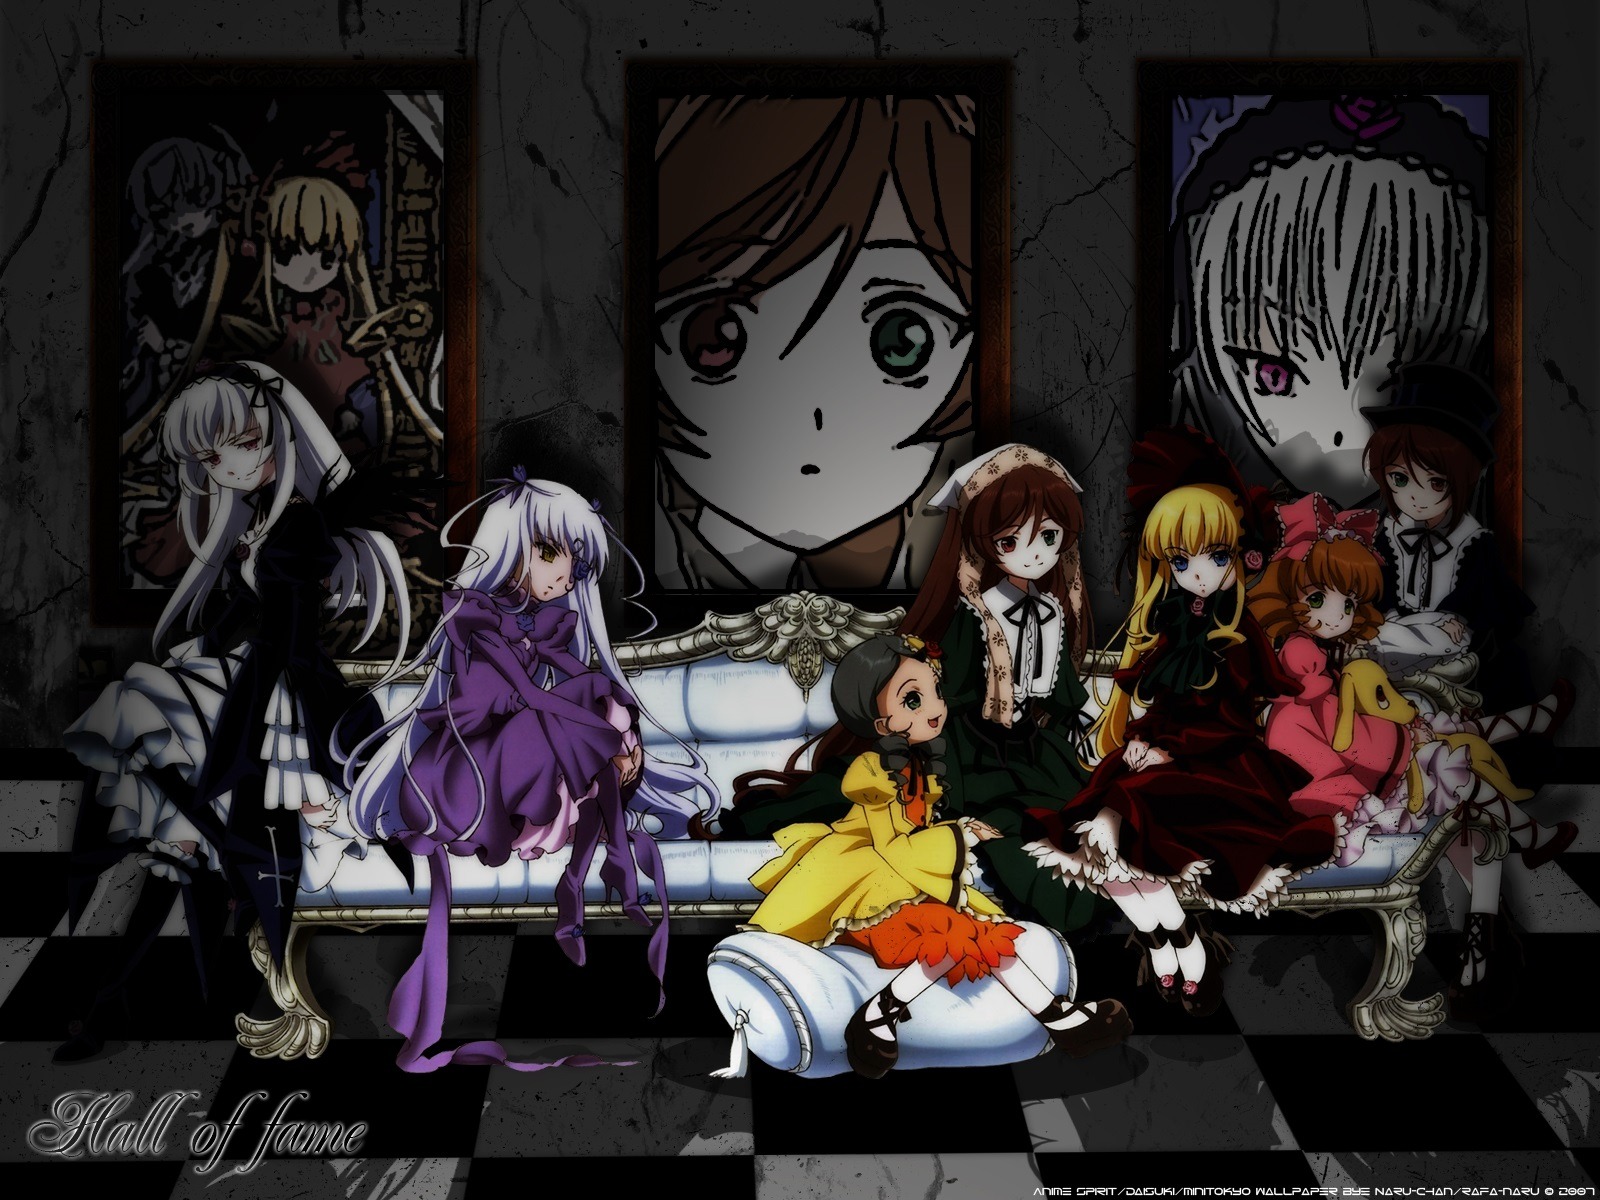 6+girls argyle argyle_background blonde_hair blue_eyes board_game bow brown_hair checkered checkered_background checkered_floor chess_piece dress eyepatch frills hat heterochromia image long_hair multiple multiple_girls perspective pink_bow red_eyes shinku silver_hair standing suigintou tagme tile_floor tiles top_hat twintails very_long_hair wings